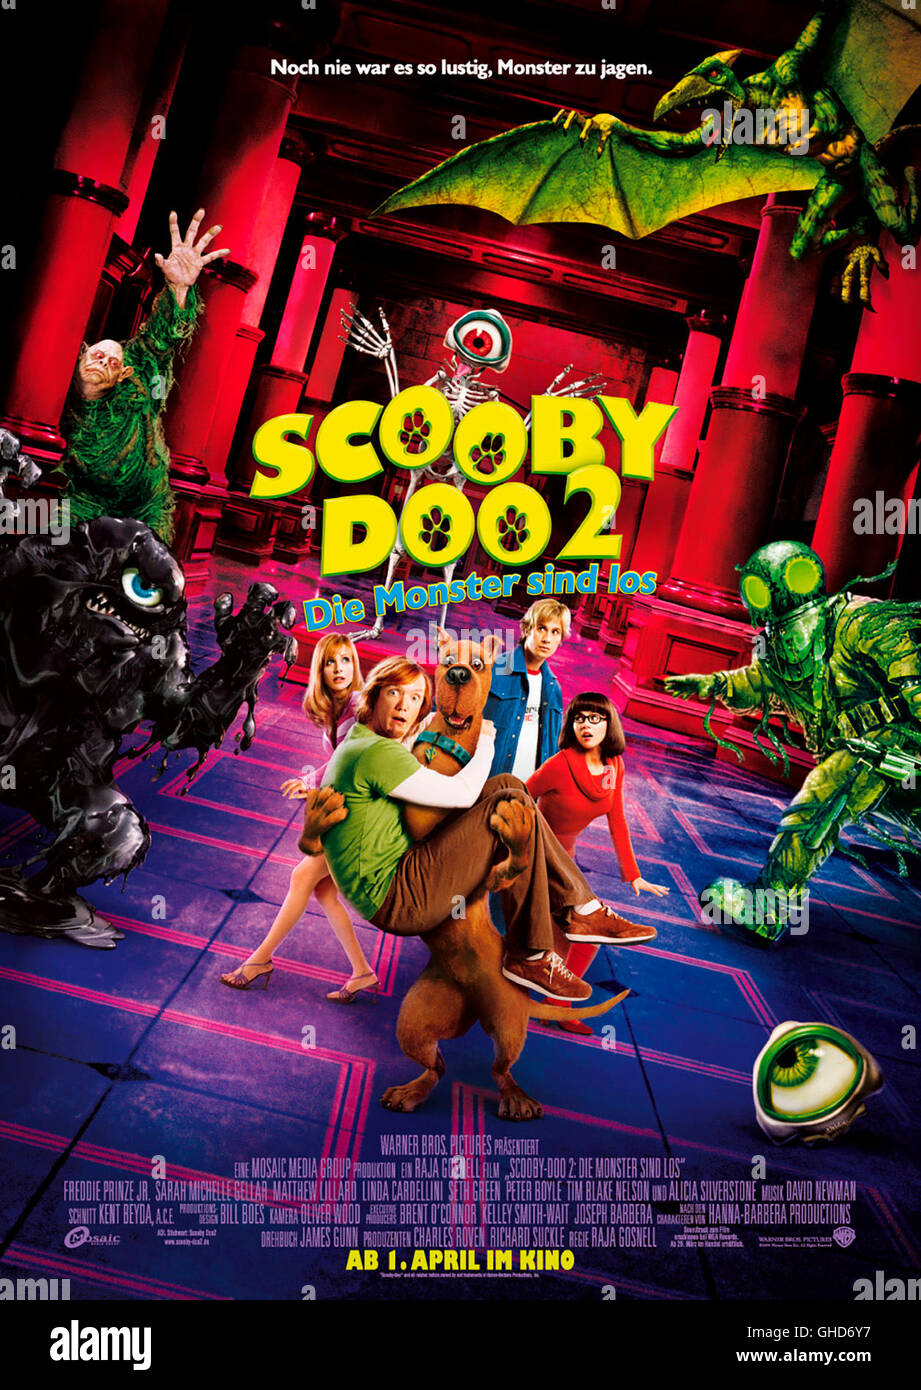 scooby doo 2 monsters unleashed captain cutler